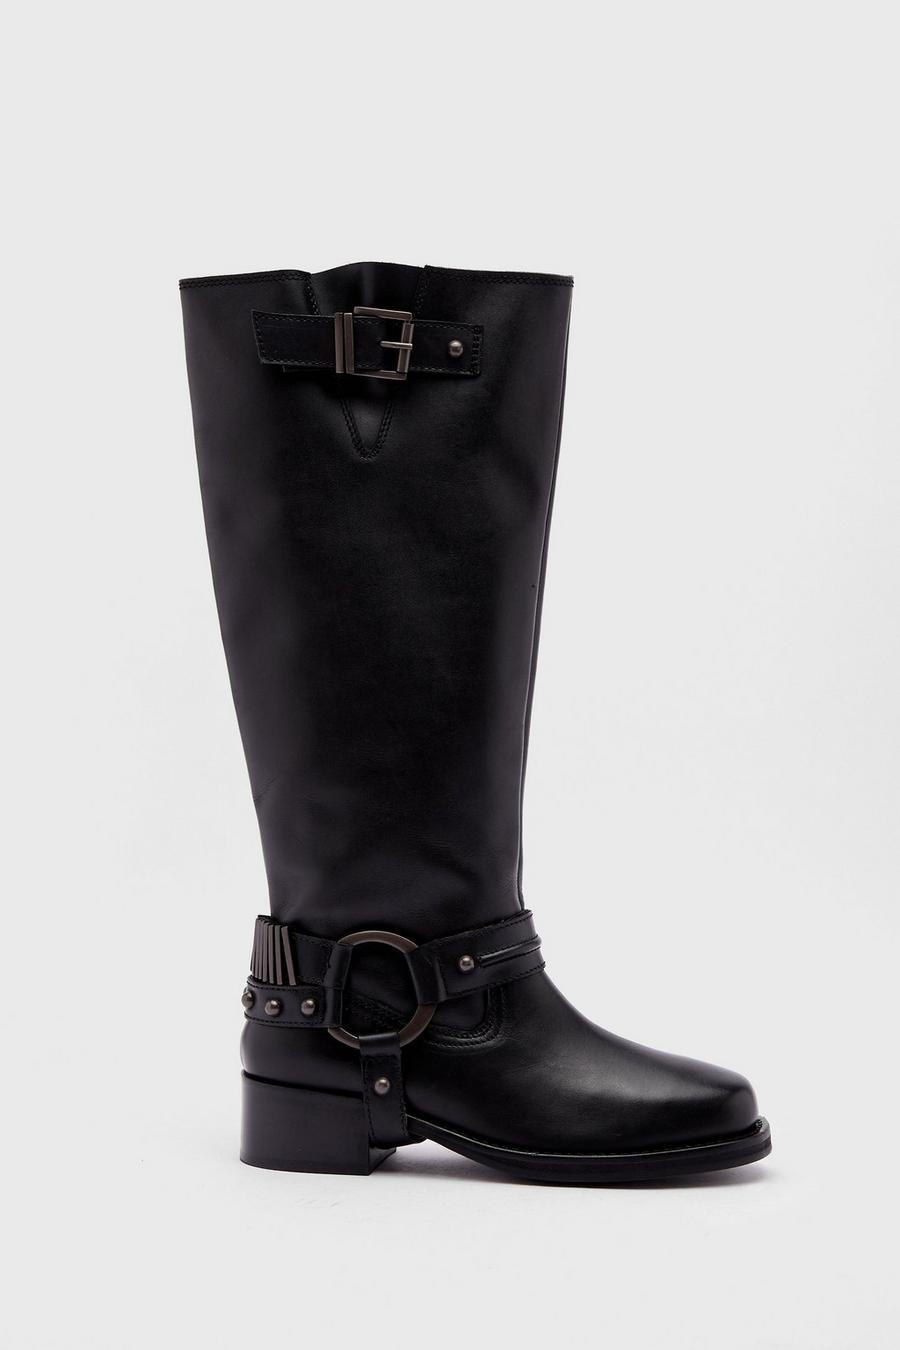 Black Tarnished Leather Buckle Harness Knee High Boots